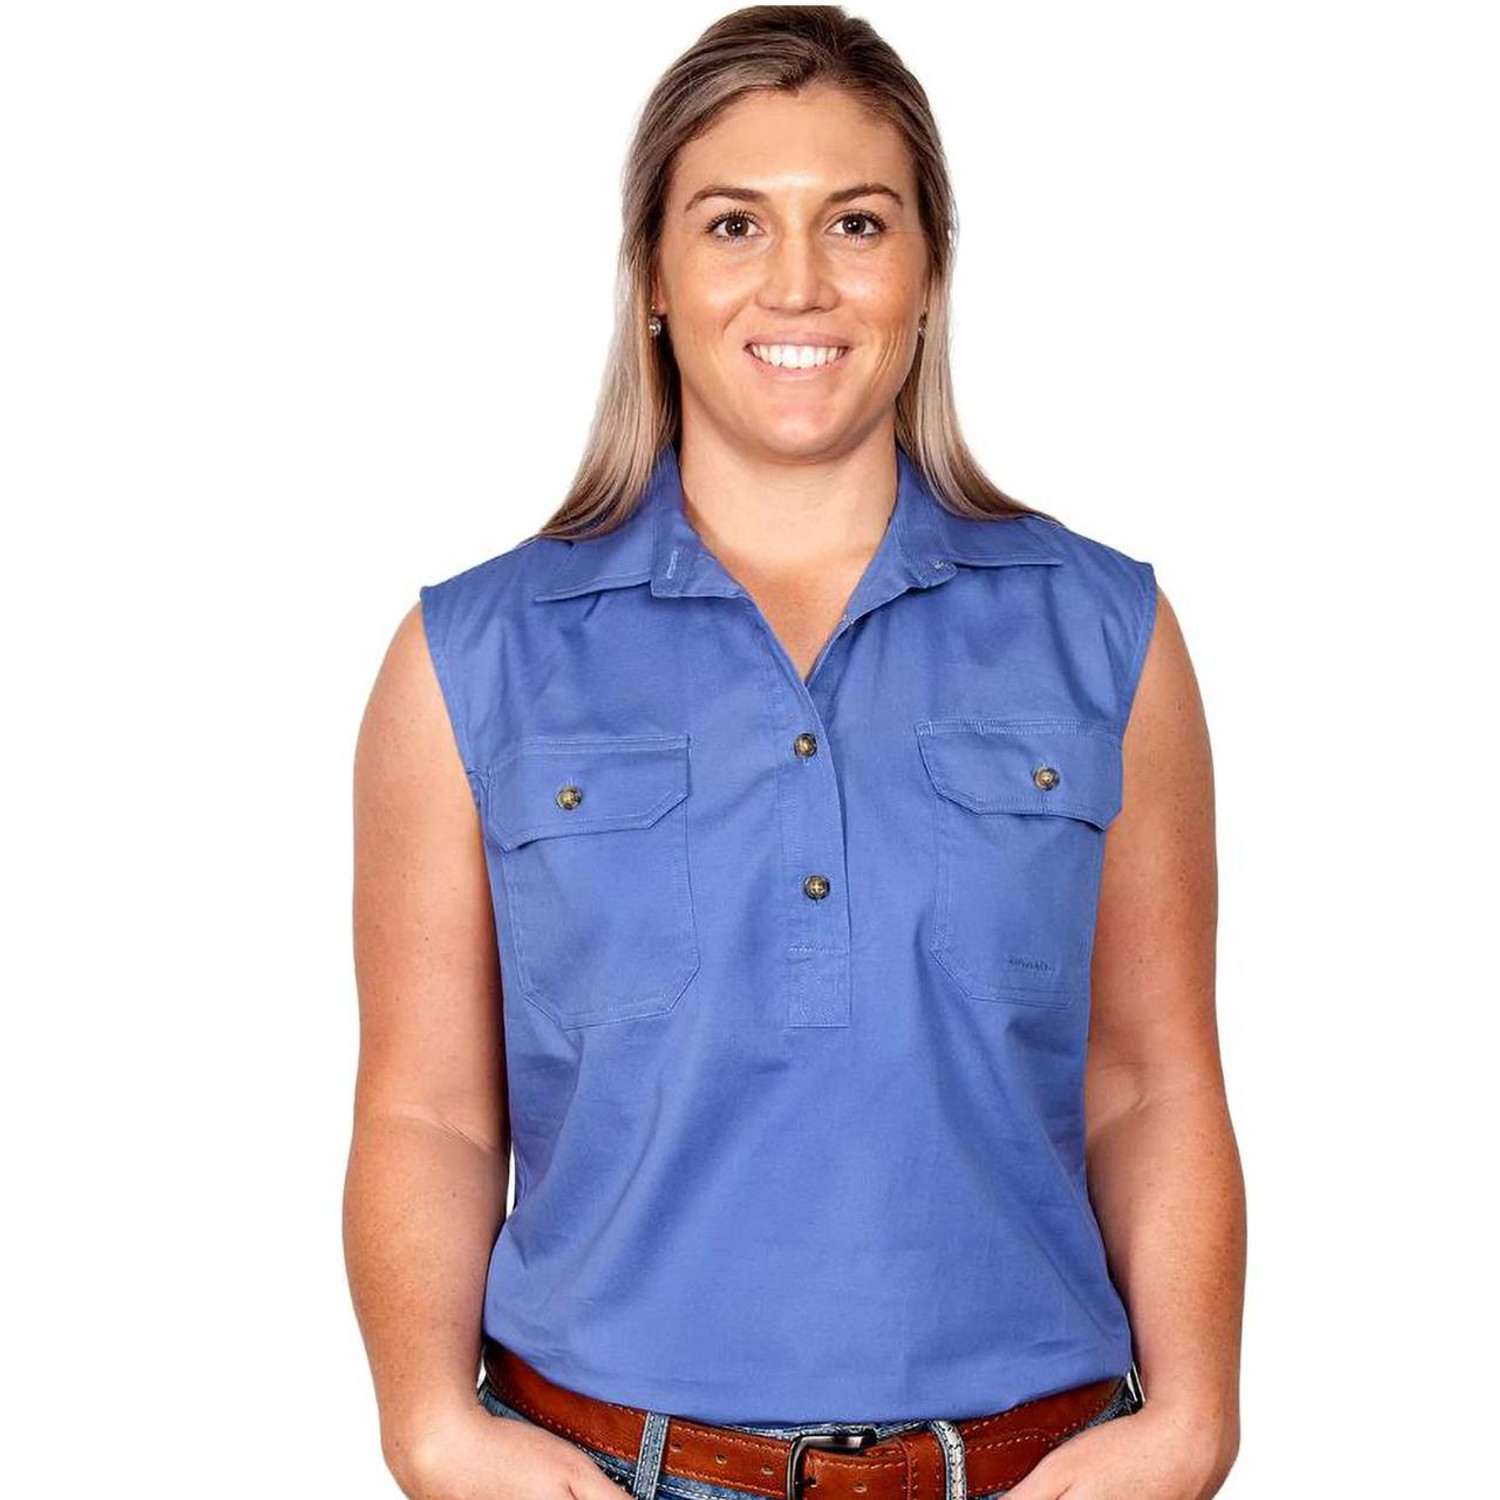  Just Country 50503 Ladies Kerry Closed Front Sleeveless Shirt  in Blue ((Bulk Buy Deal, Buy 4 or more Just Country Adults Shirts for $44.95 Each!) 